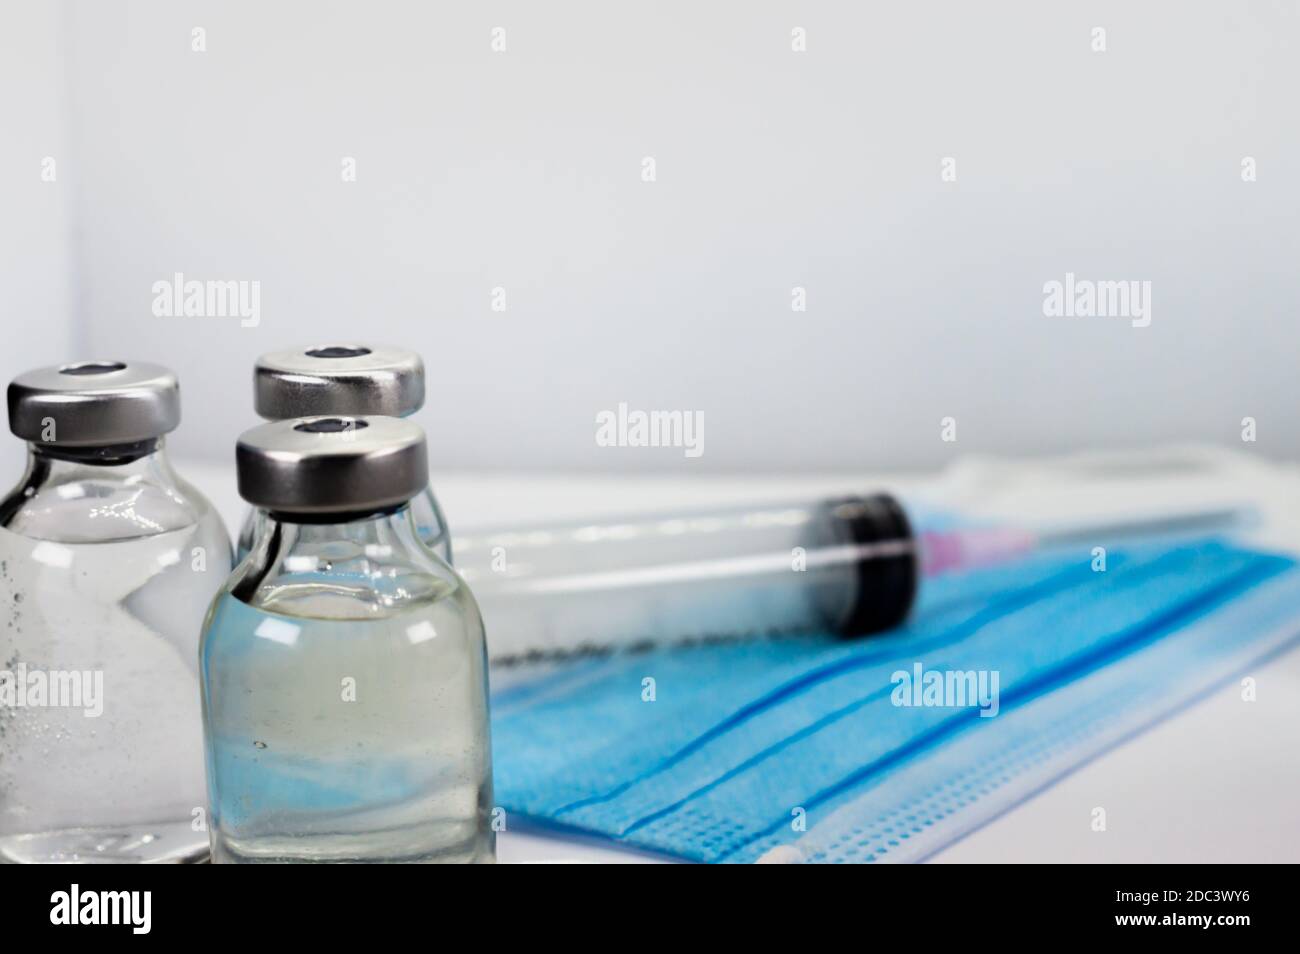 Vaccine Vial, Syringe and blue Medical Face Mask Stock Photo